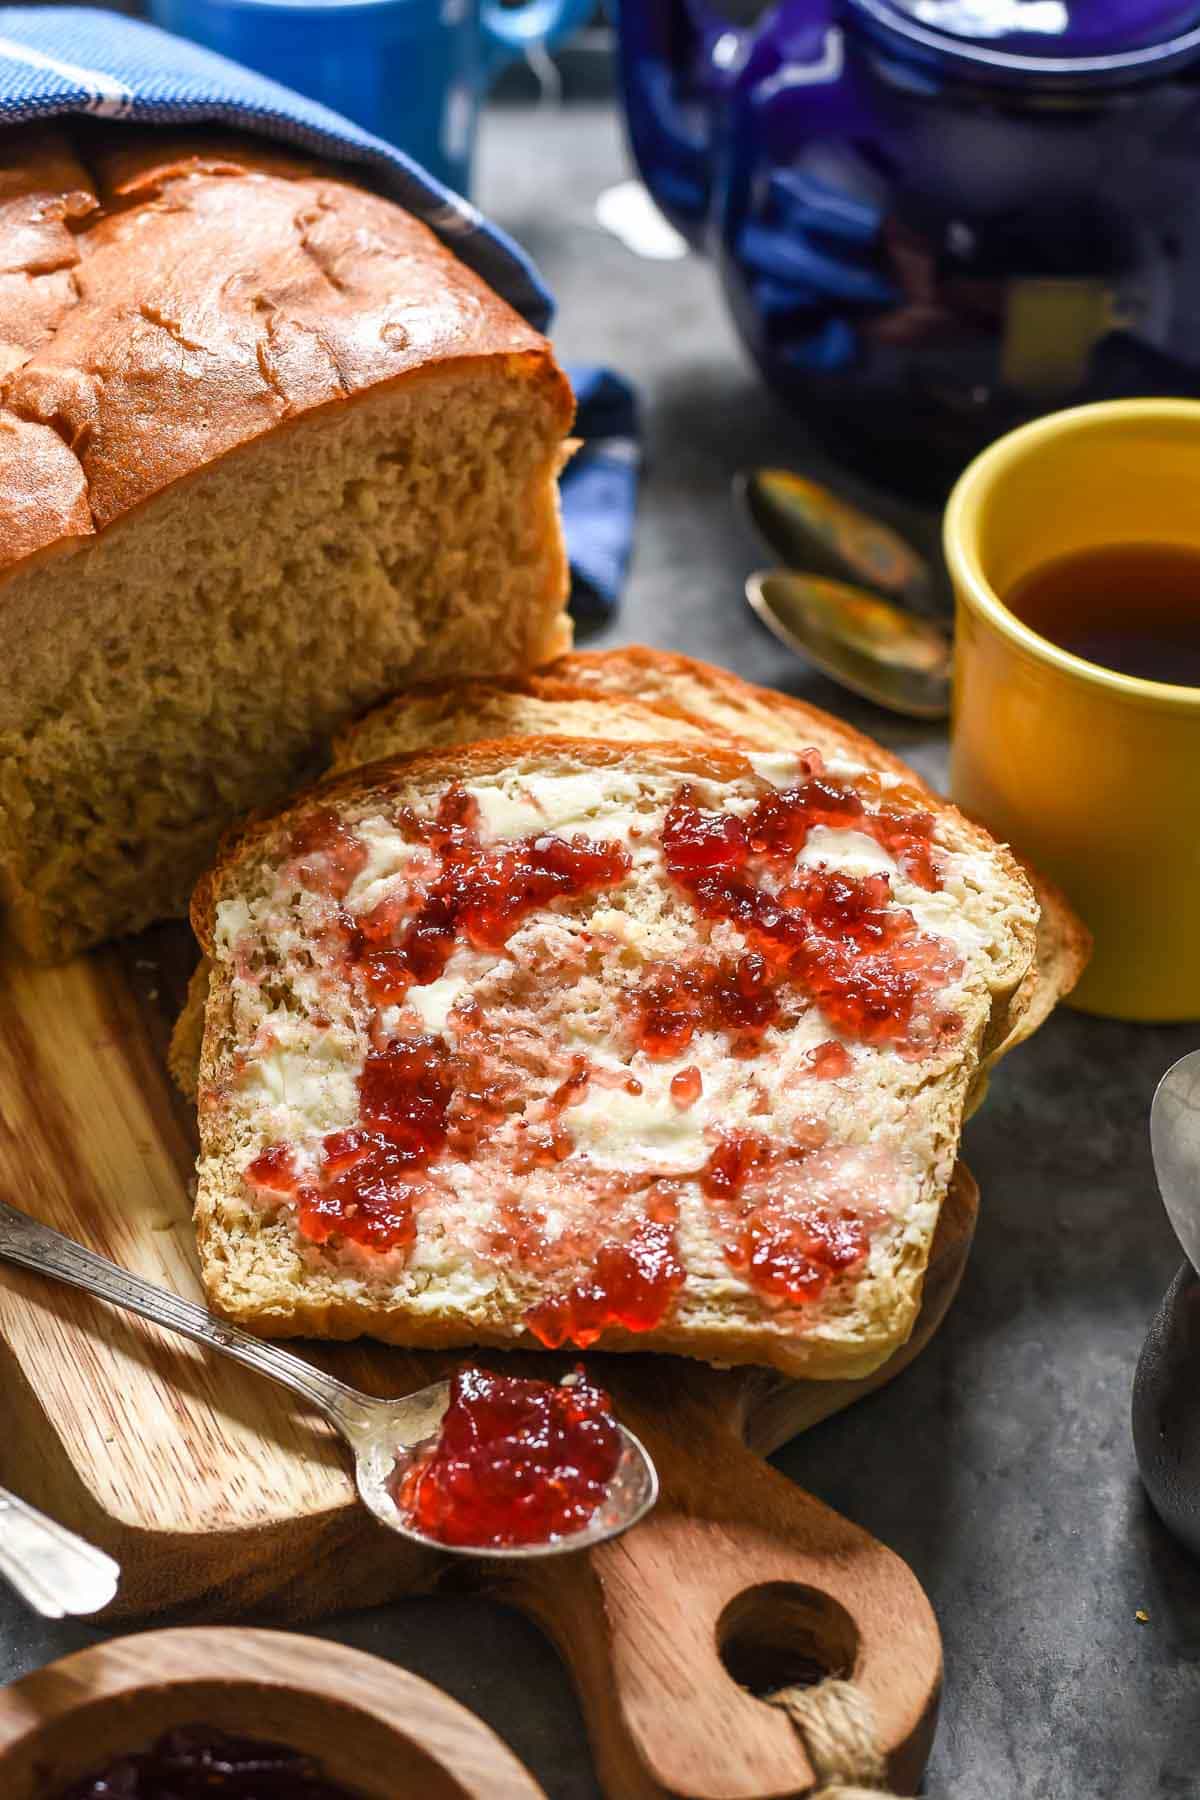 If you've been intimidated by homemade bread, this Amish White Bread recipe is a great way to start. It's easy and turns out an amazing fluffy, slightly sweet loaf!